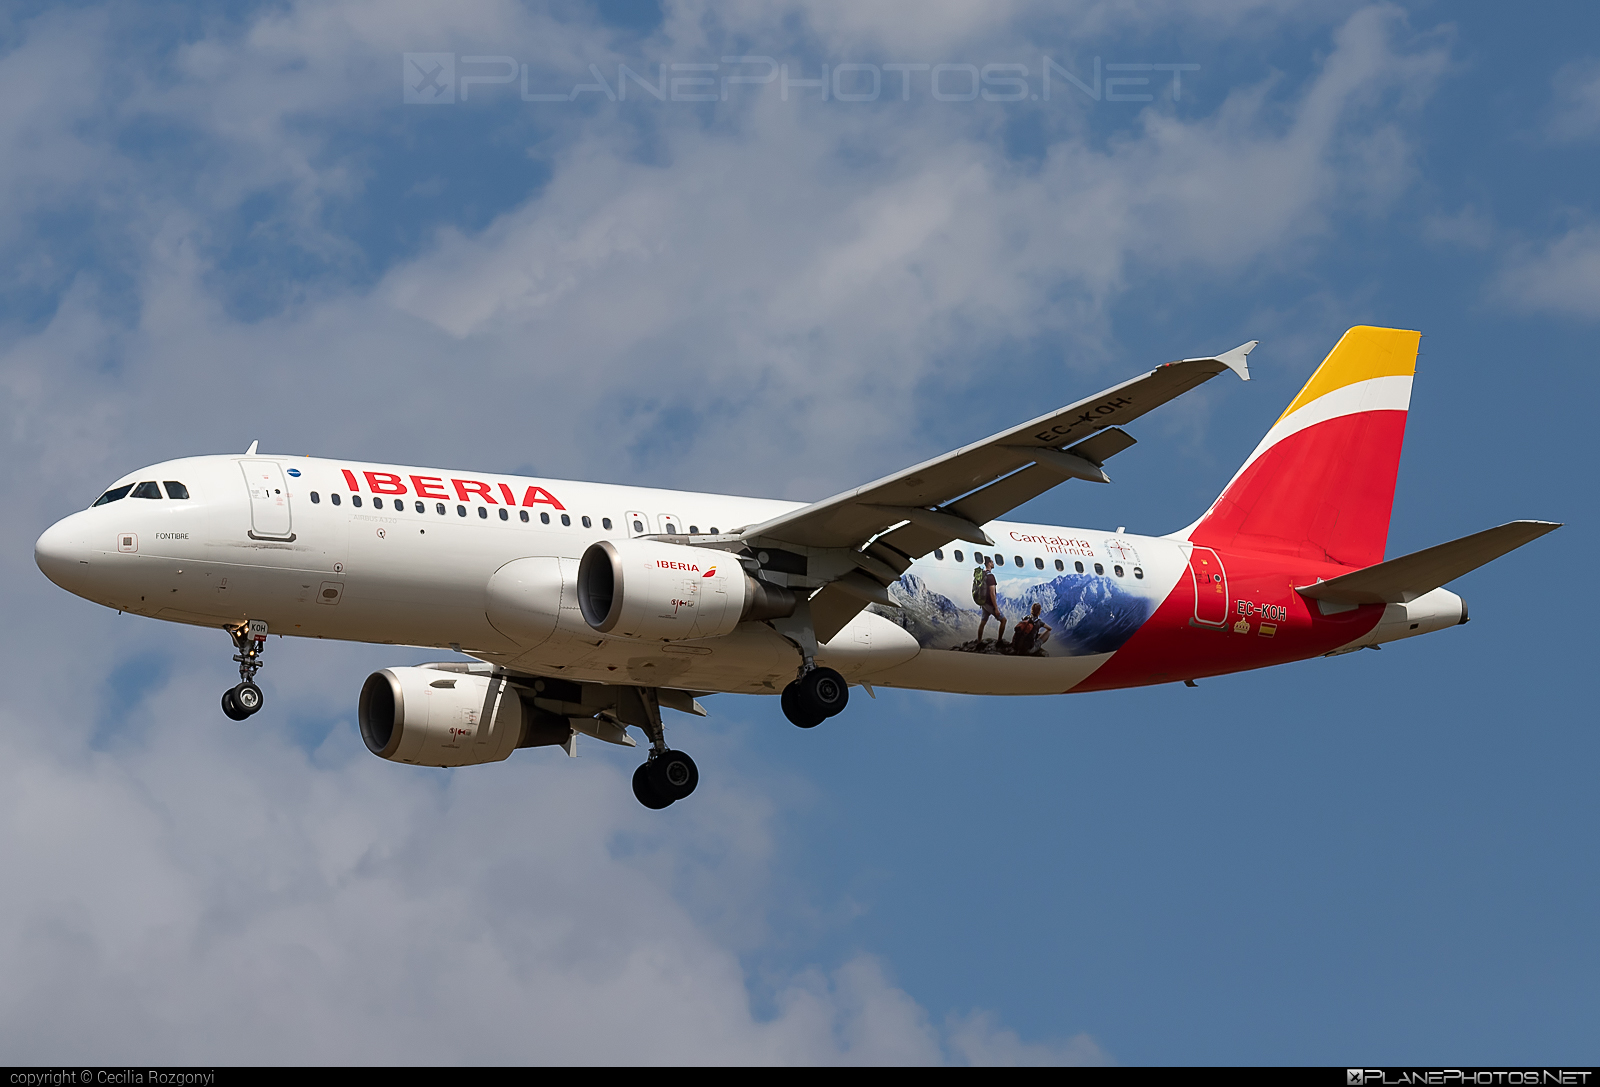 Airbus A320-214 - EC-KOH operated by Iberia #AirbusA320-214 #CantabriaInfinitaLivery #FerencLisztIntl #a320 #a320family #airbus #airbus320 #iberia